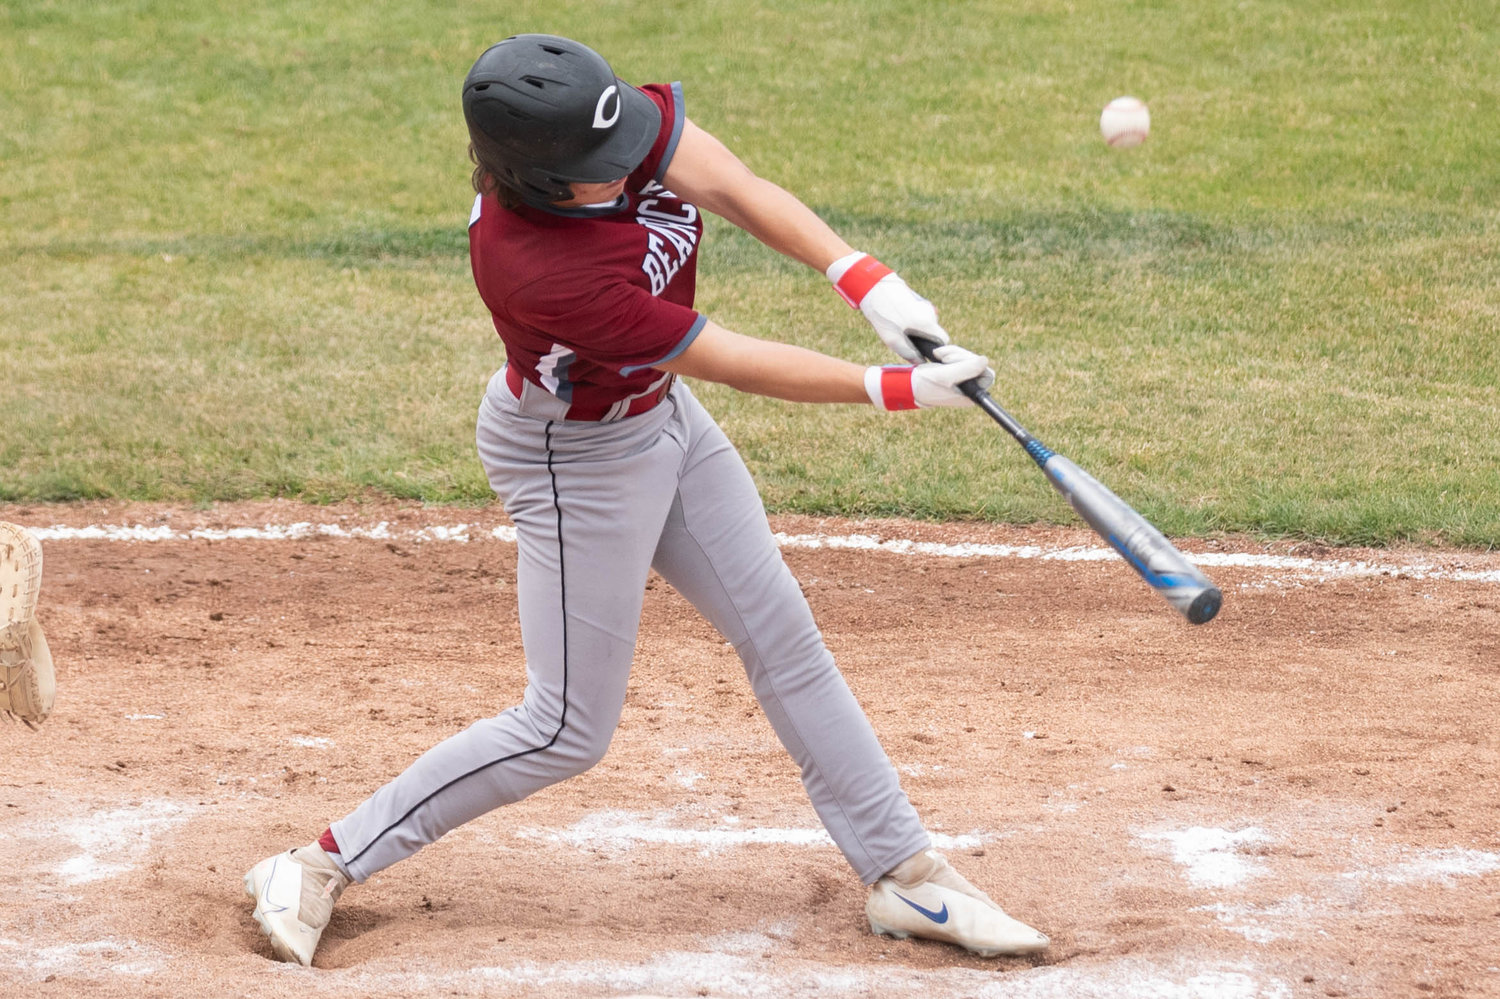 W.F. West's Riggs Westlund makes contact with a pitch against Tumwater in the 2A State Baseball Semifinals at Yakima County Stadium May 27.